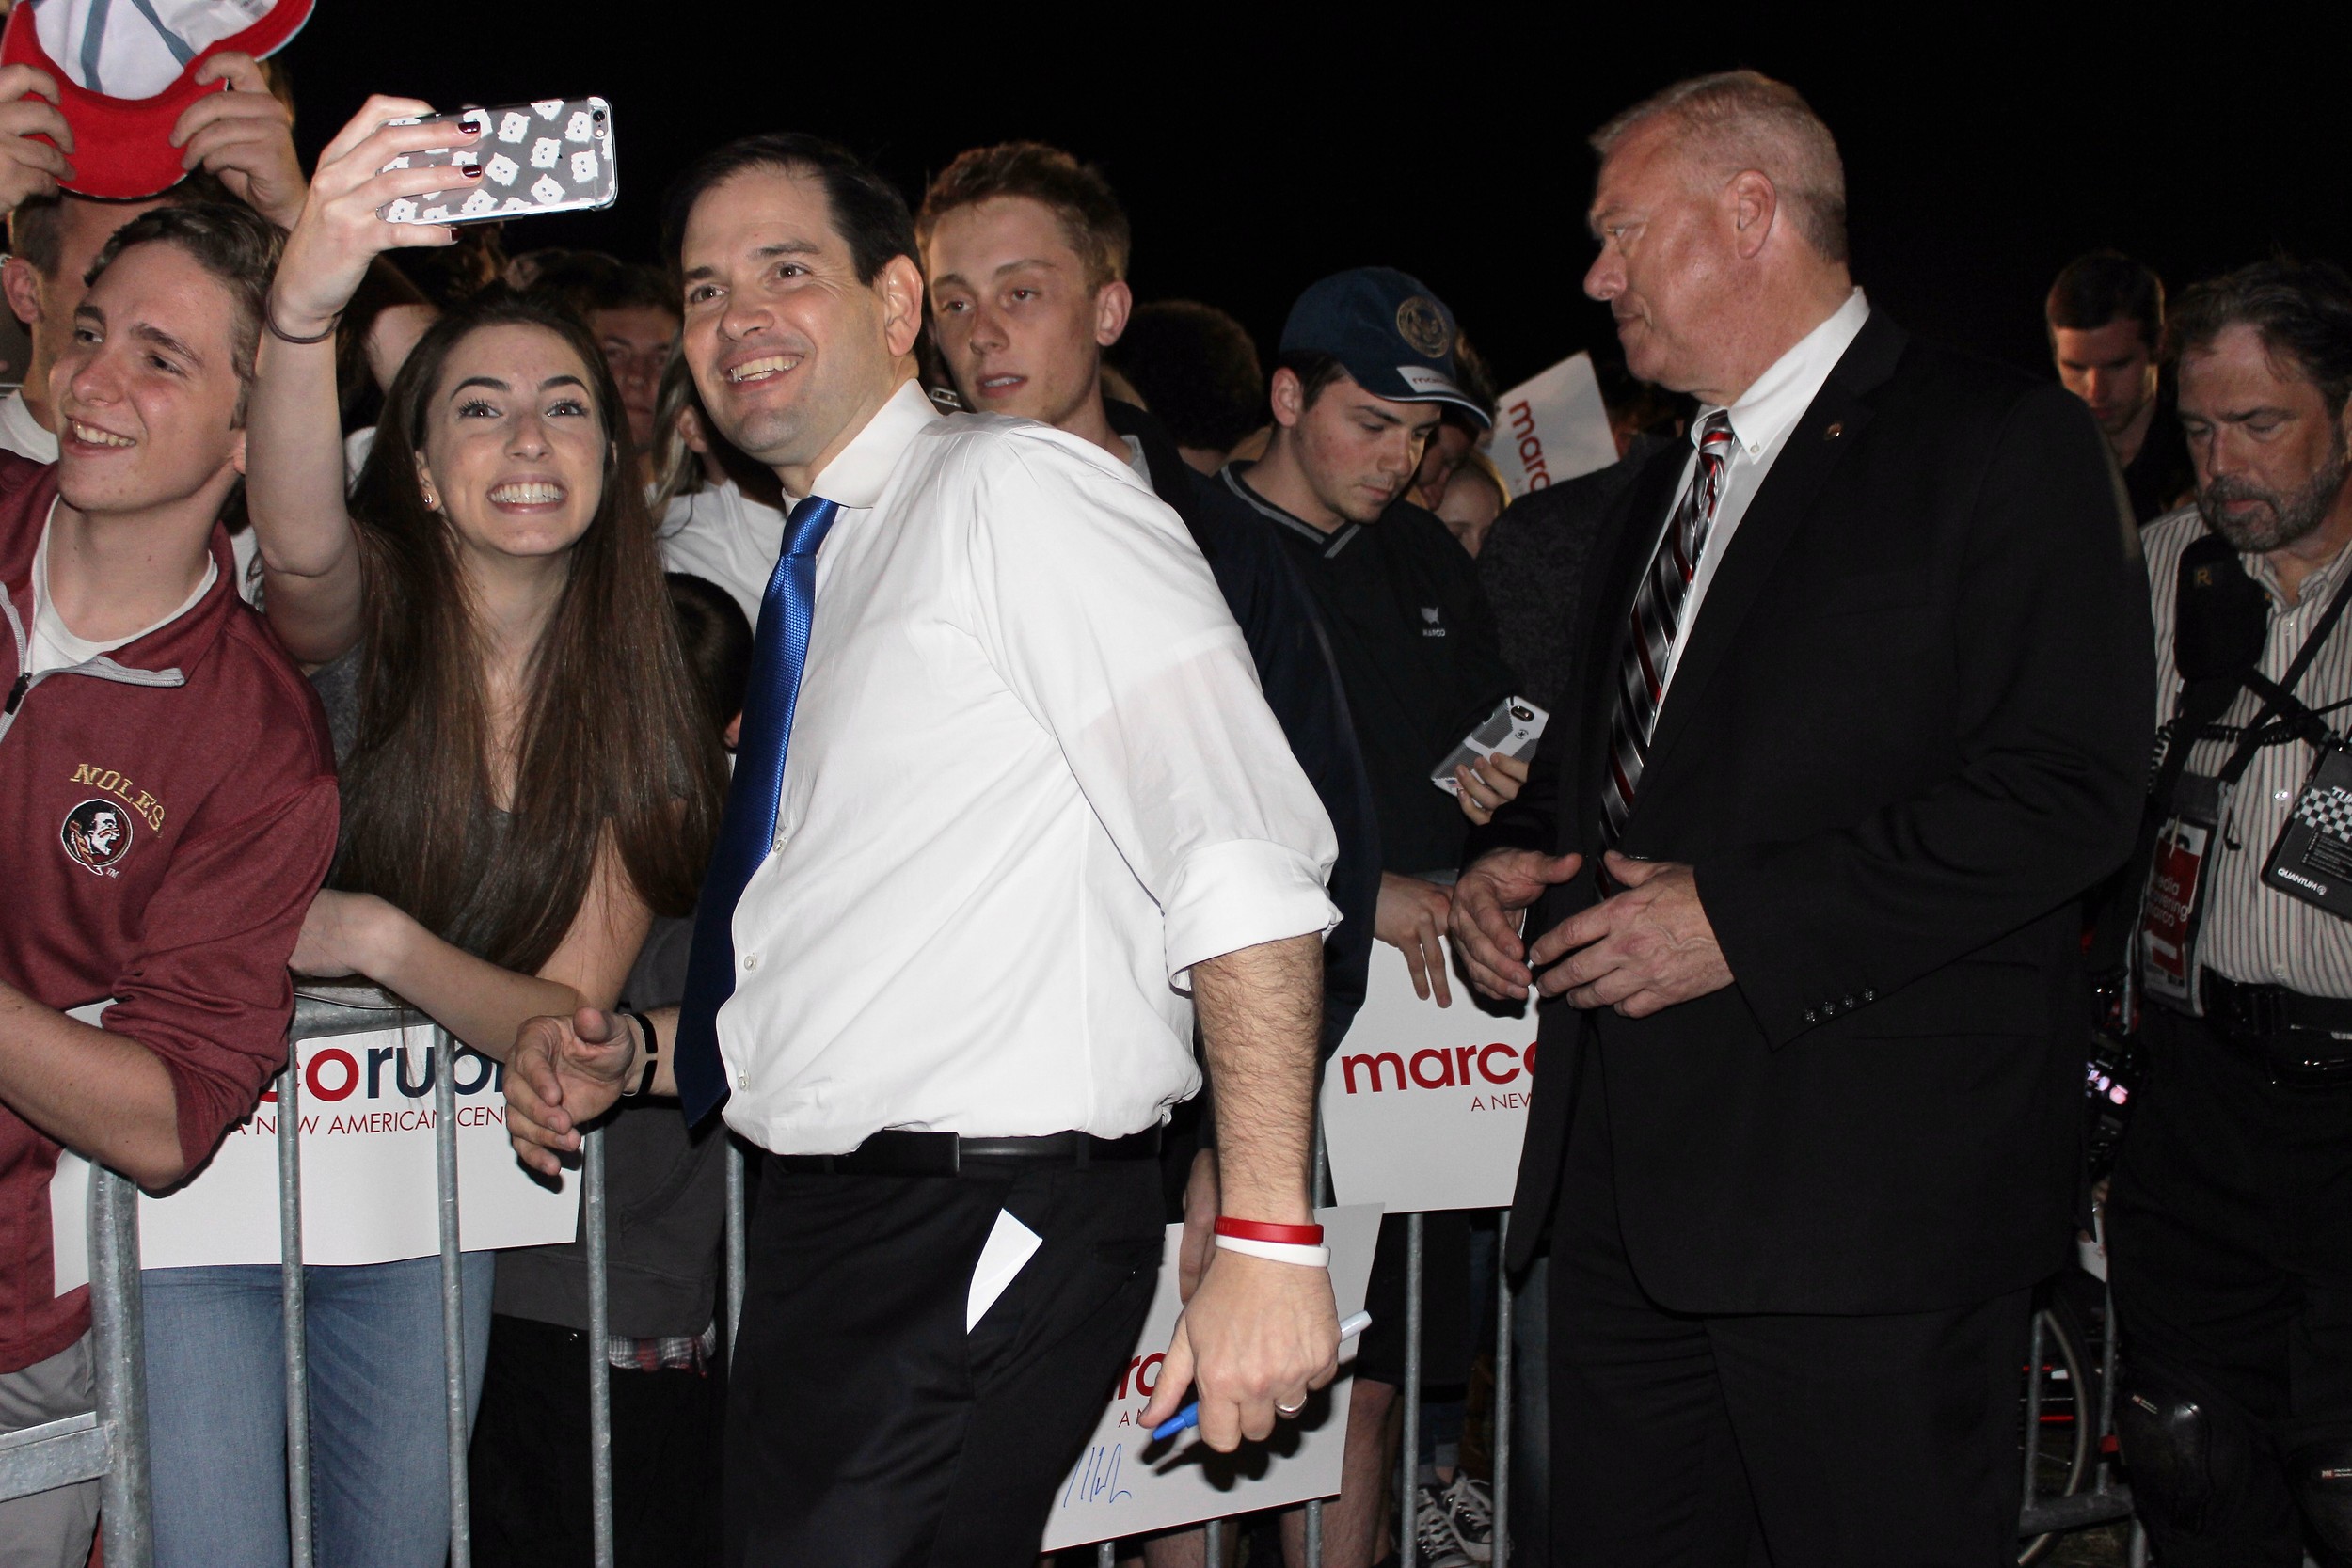 Marco Rubio poses for photos while campaigning in Nocatee for president earlier this year